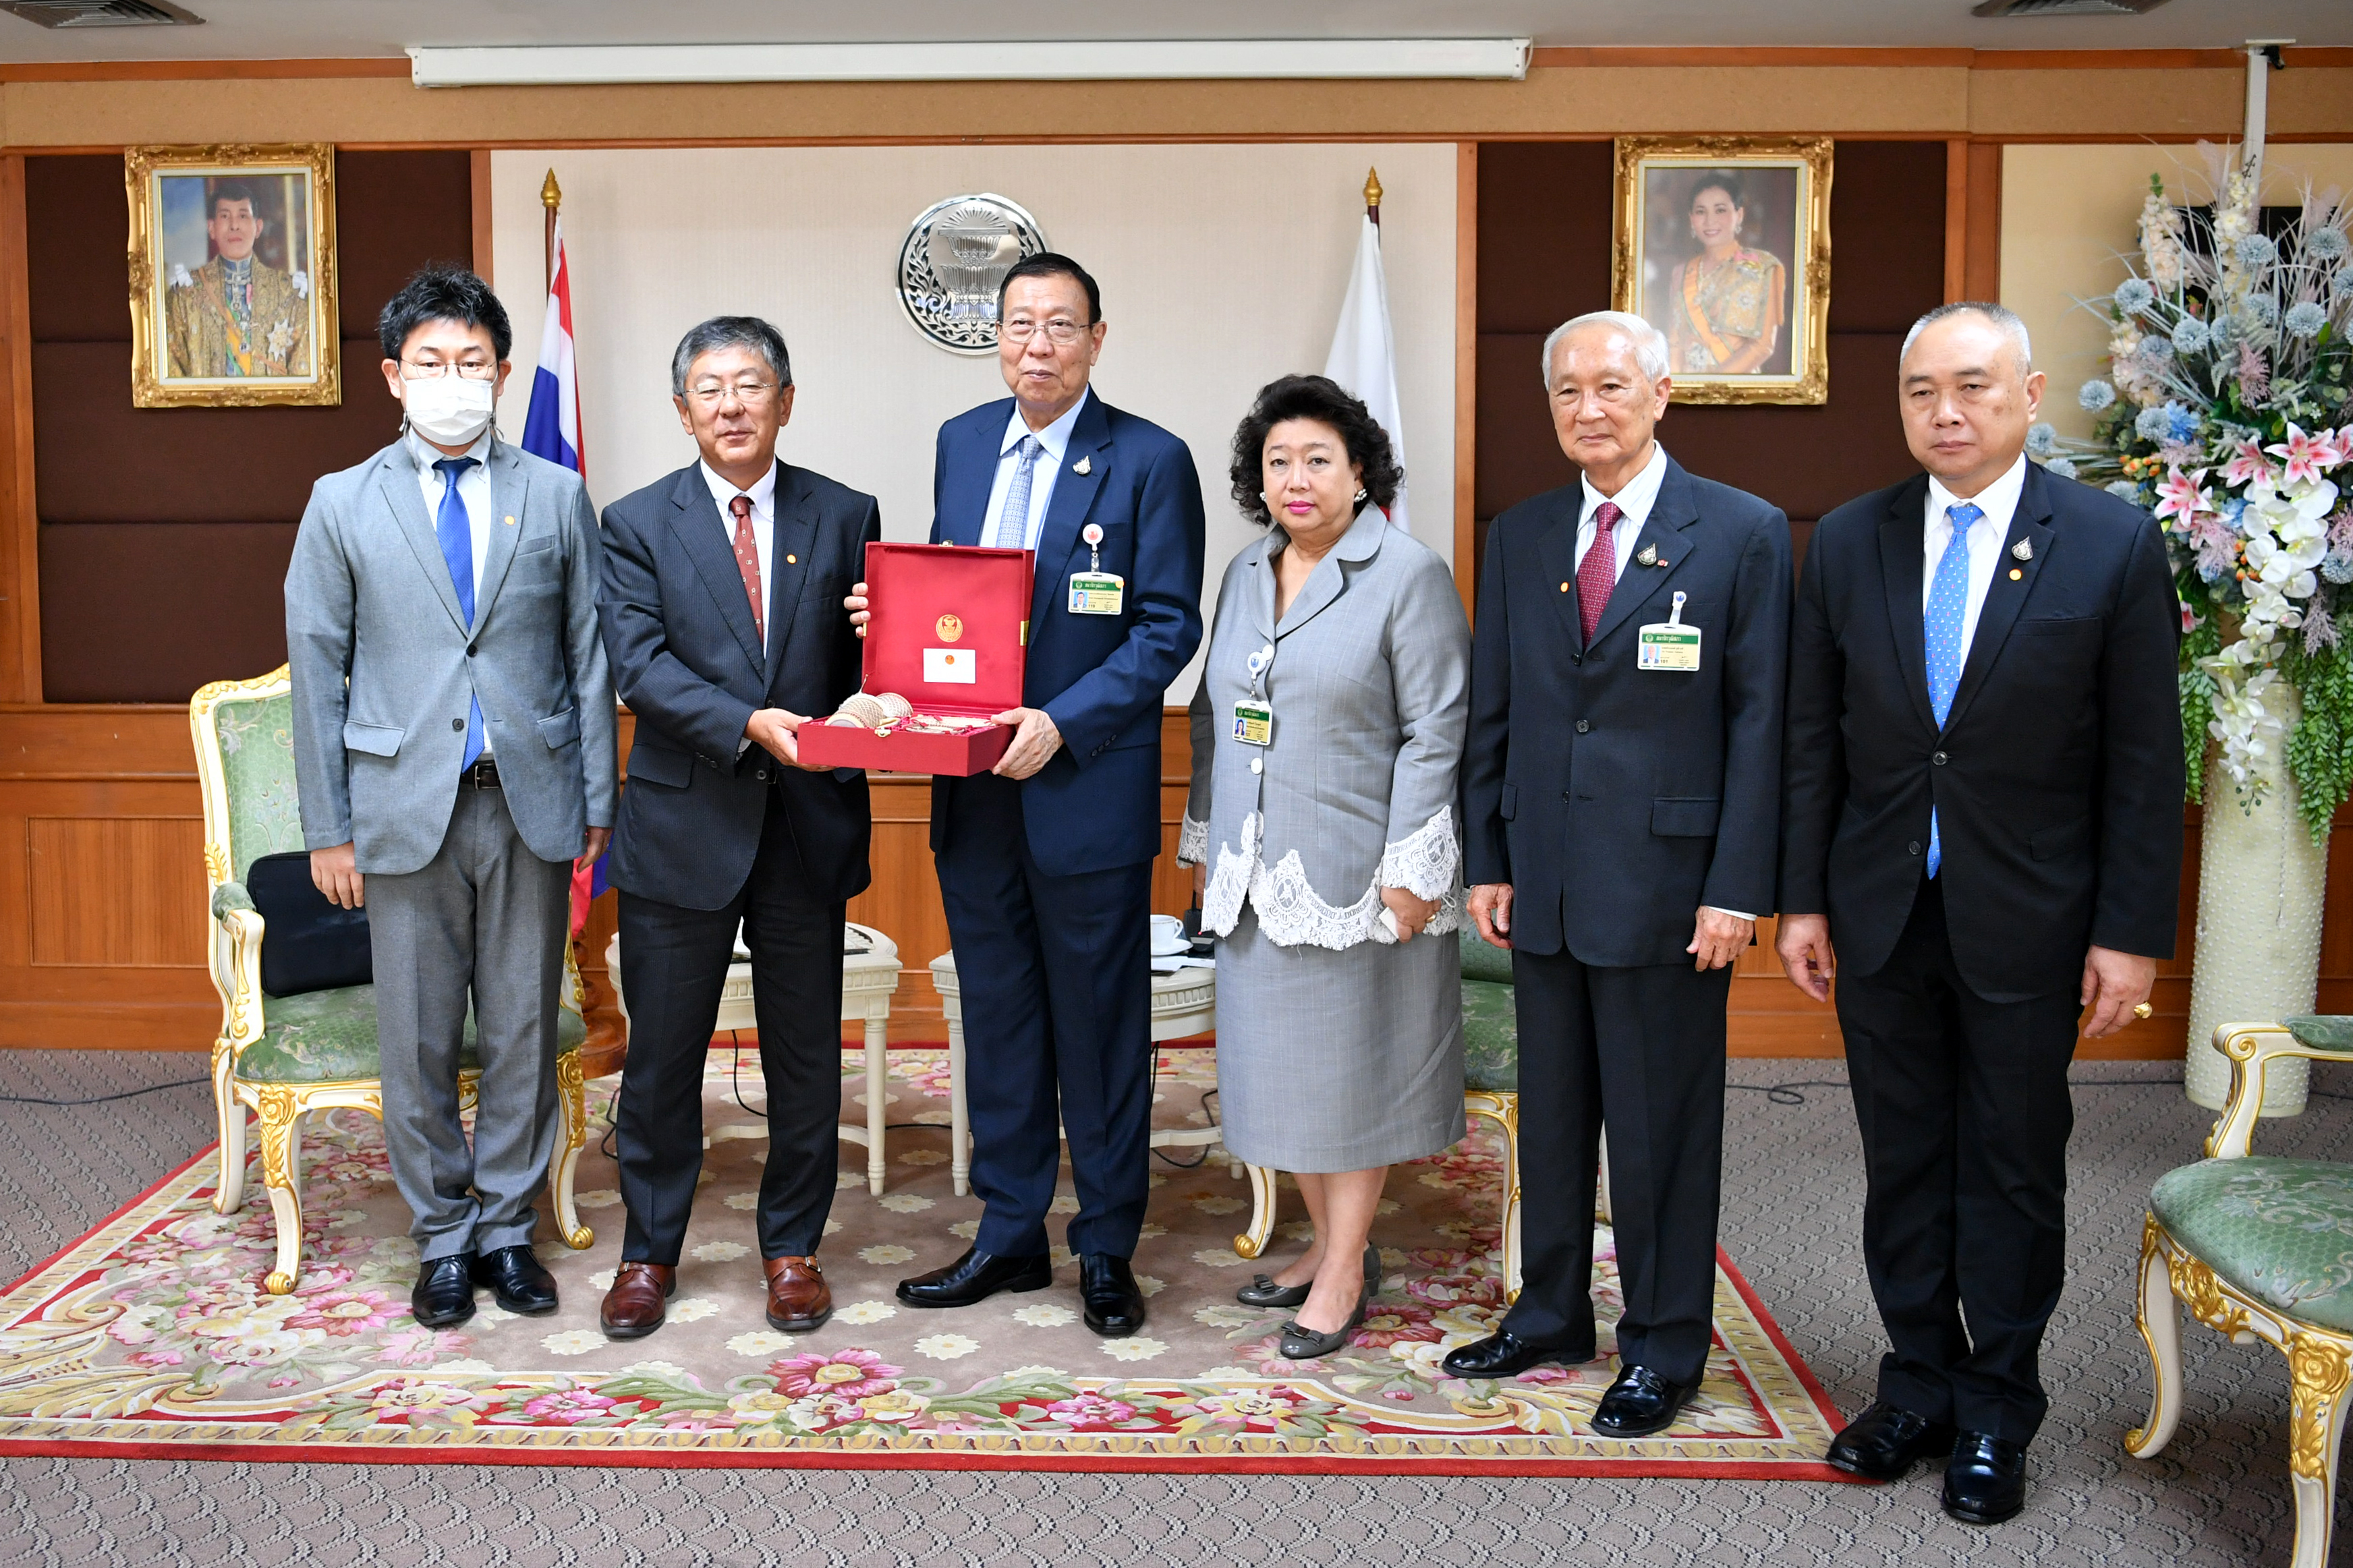 The Ambassador of Japan to Thailand Paid a Courtesy Call on the President of the Senate (17 September 2020)